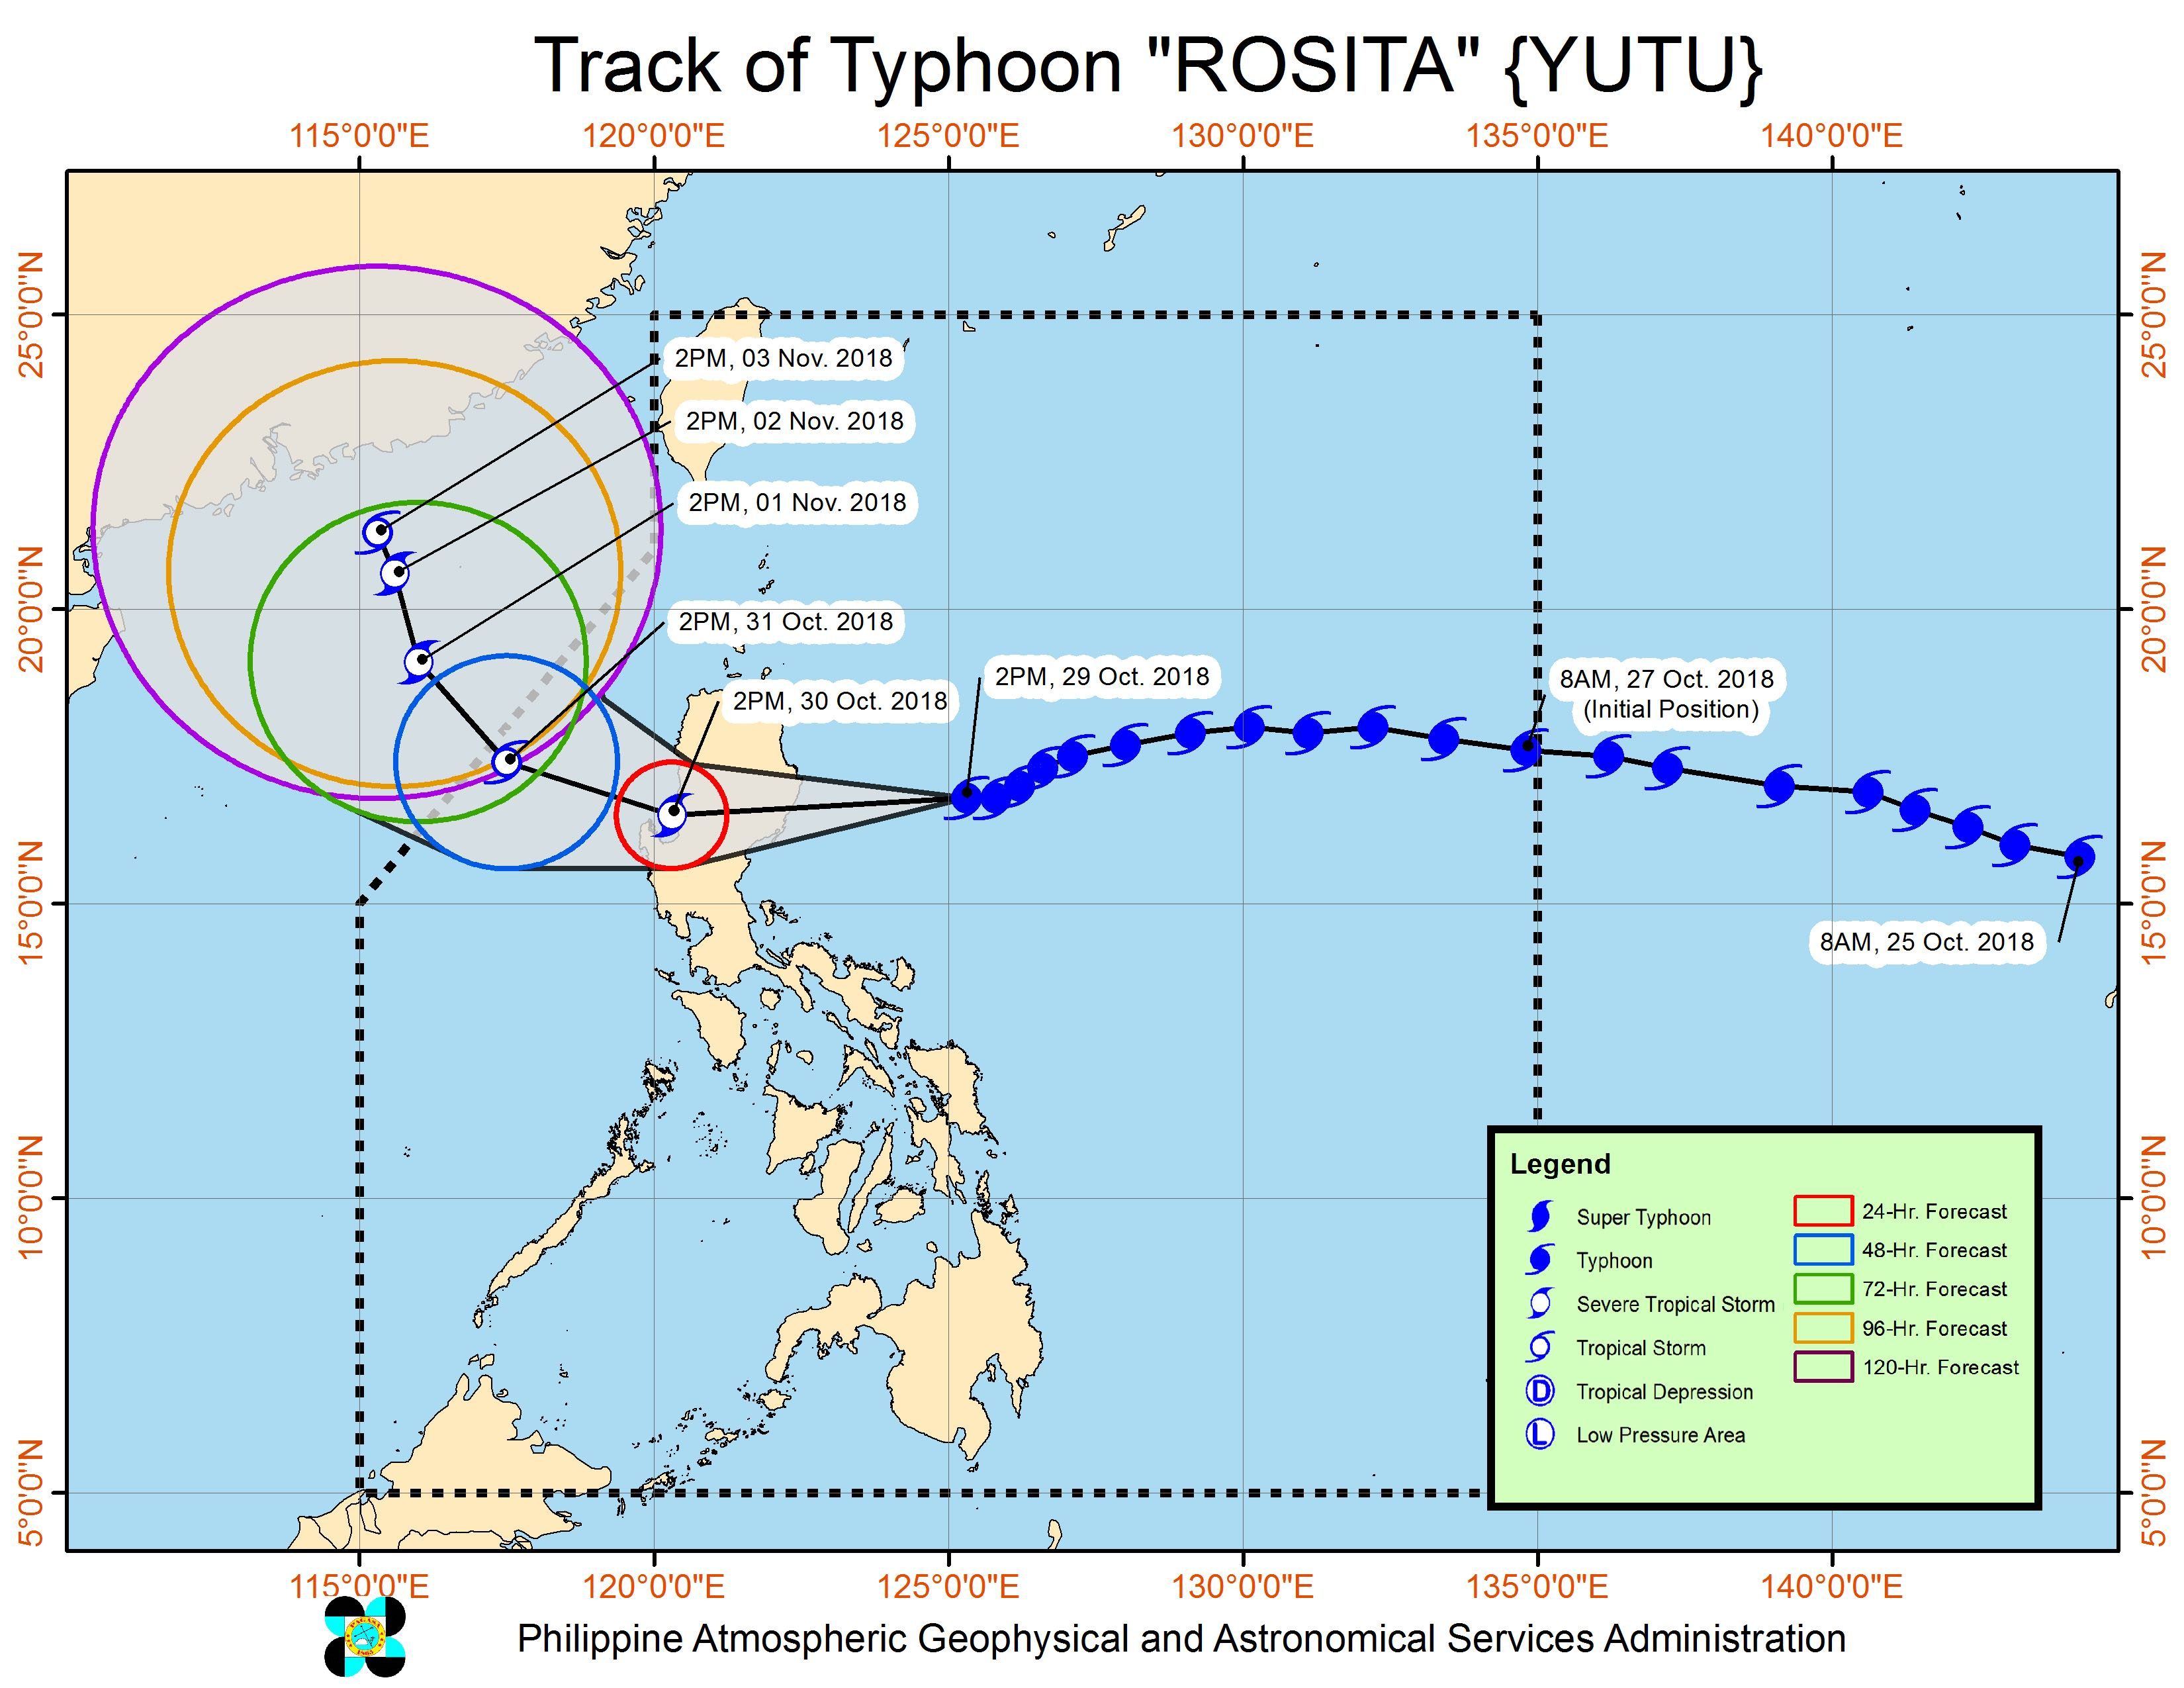 Forecast track of Typhoon Rosita (Yutu) as of October 29, 2018, 5 pm. Image from PAGASA 